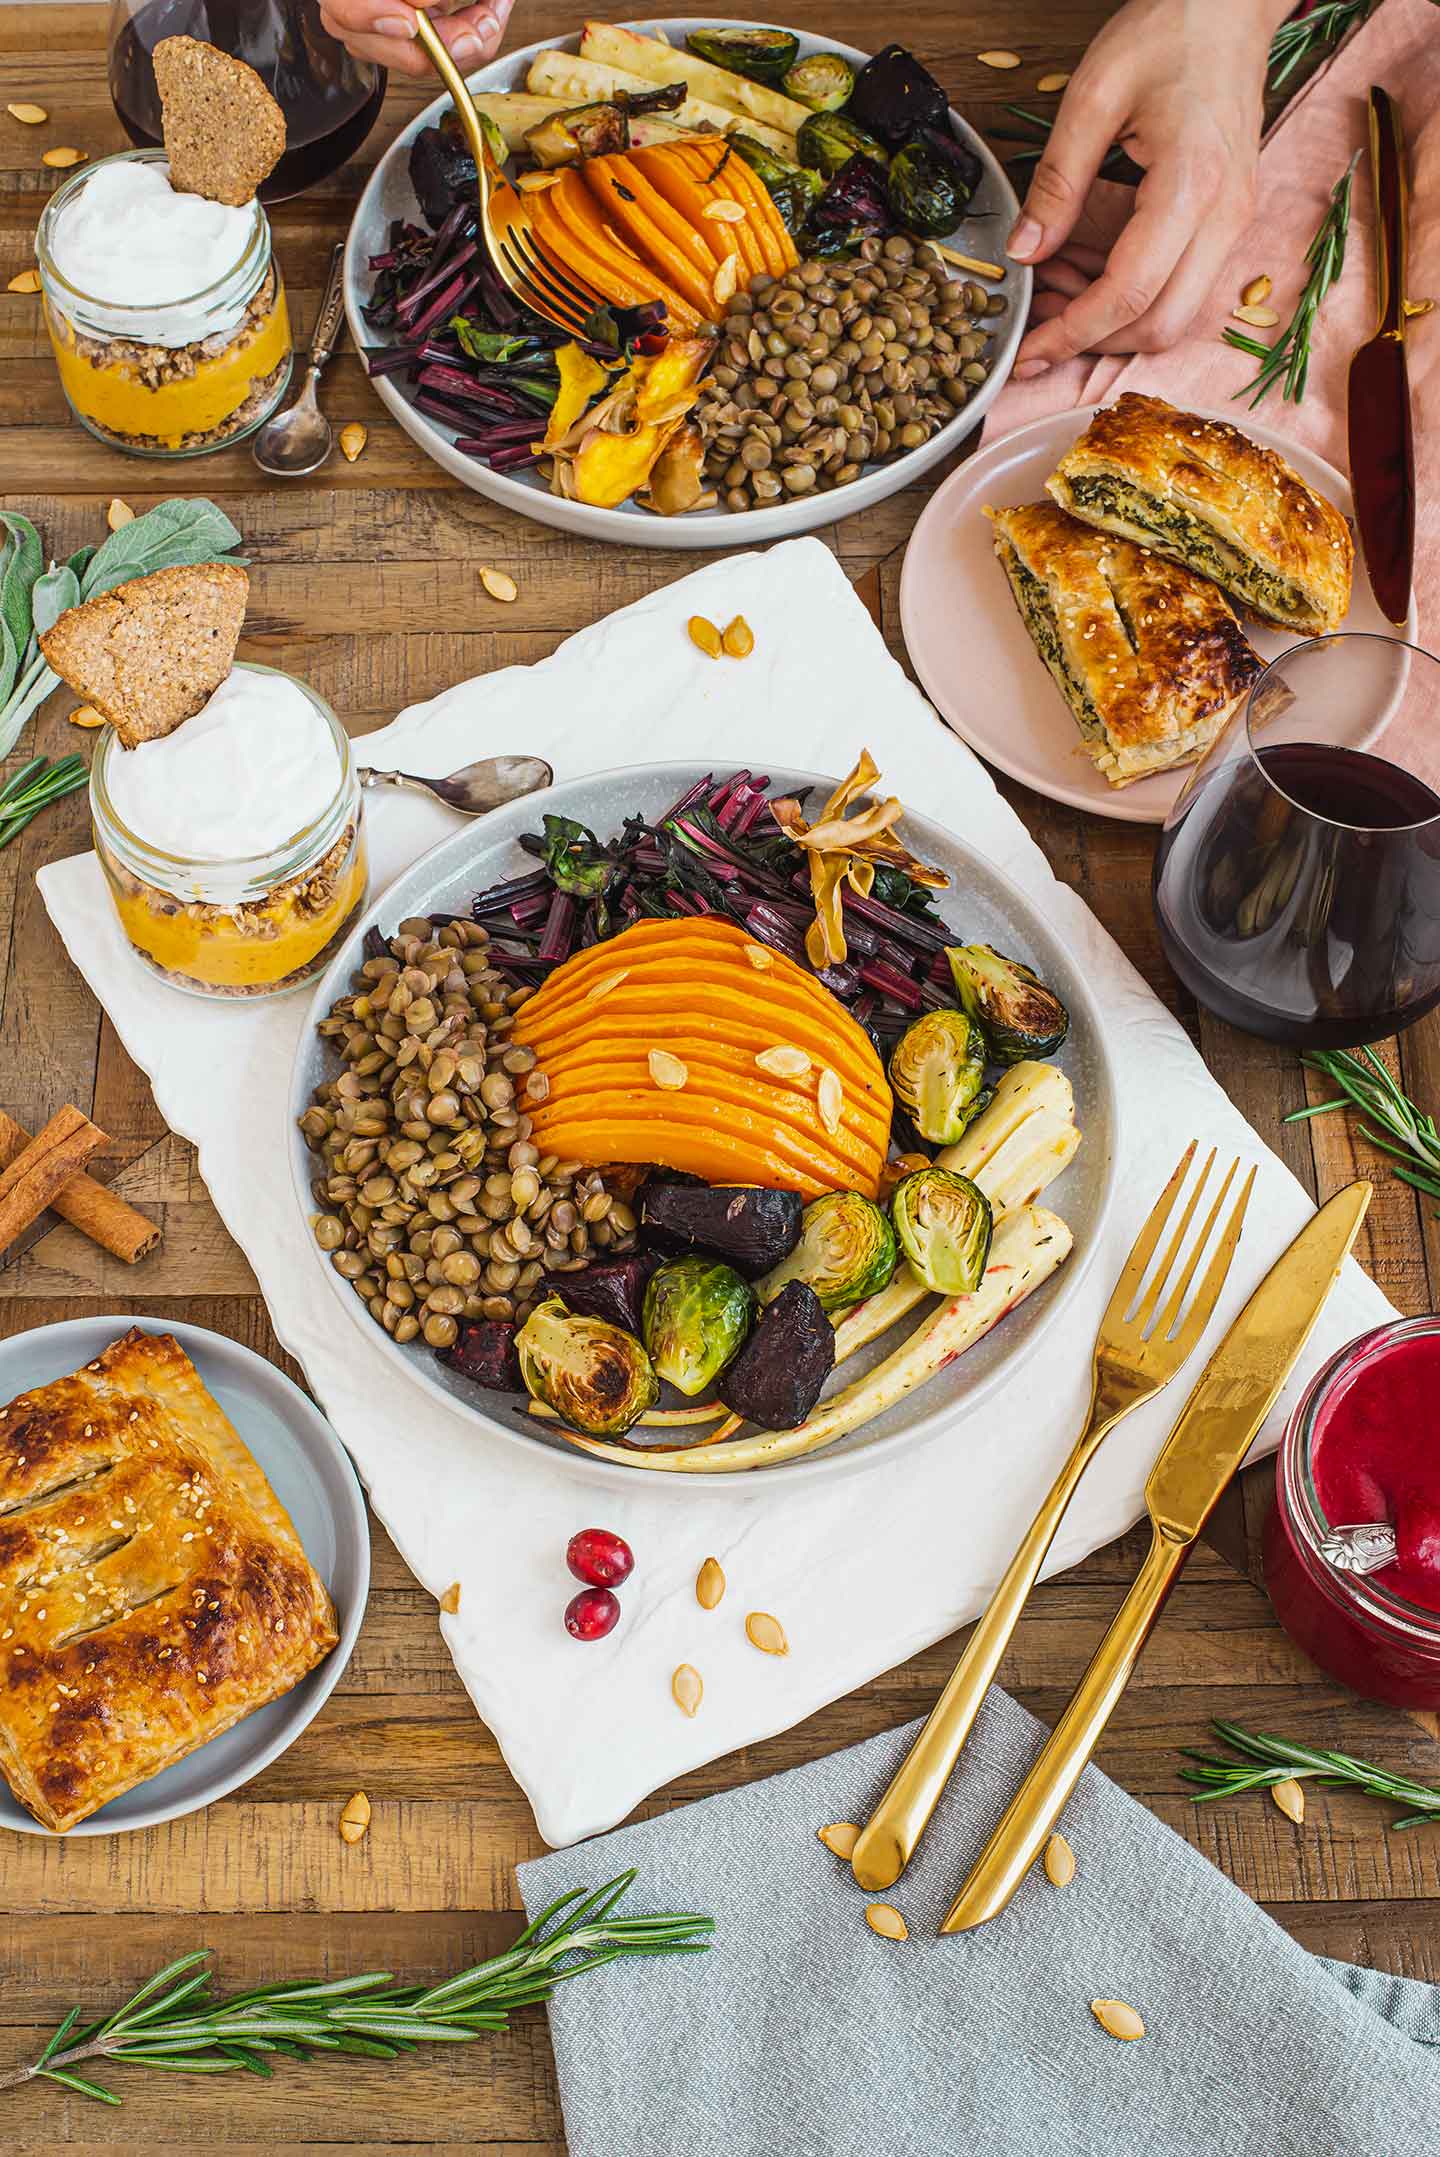 Top down view of a holiday table. Hasselback butternut squash is in the middle of a plate of roasted vegetables, beet greens, and lentils. Cranberry sauce, a puff pastry appetizer, and a pumpkin pie parfait, and a glass of red wine surround the plate.